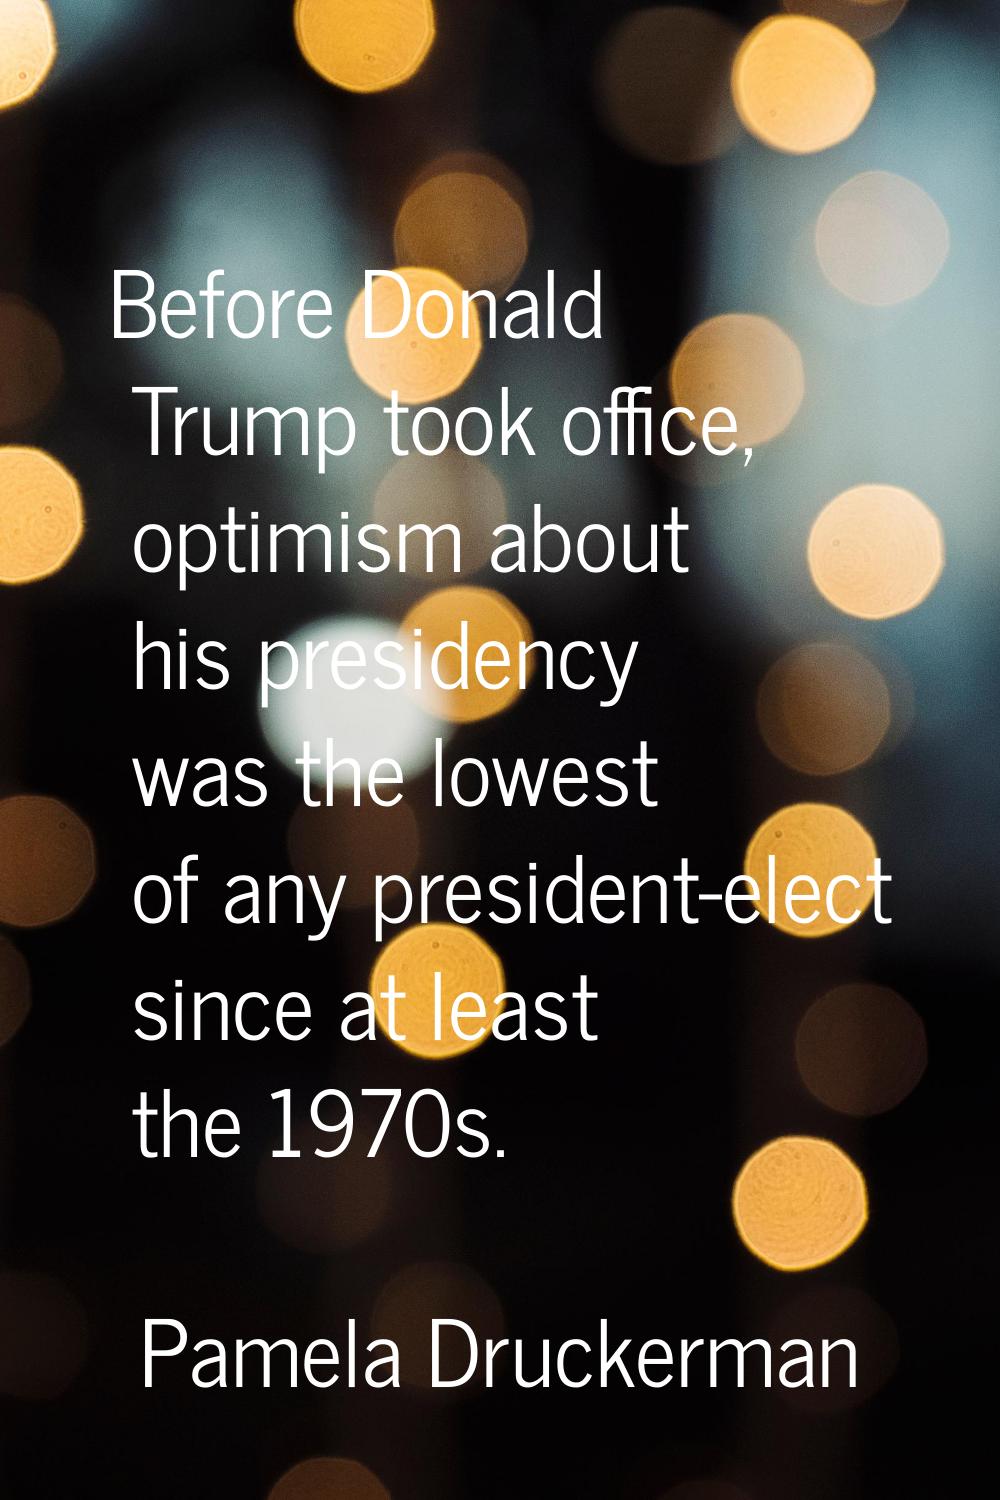 Before Donald Trump took office, optimism about his presidency was the lowest of any president-elec